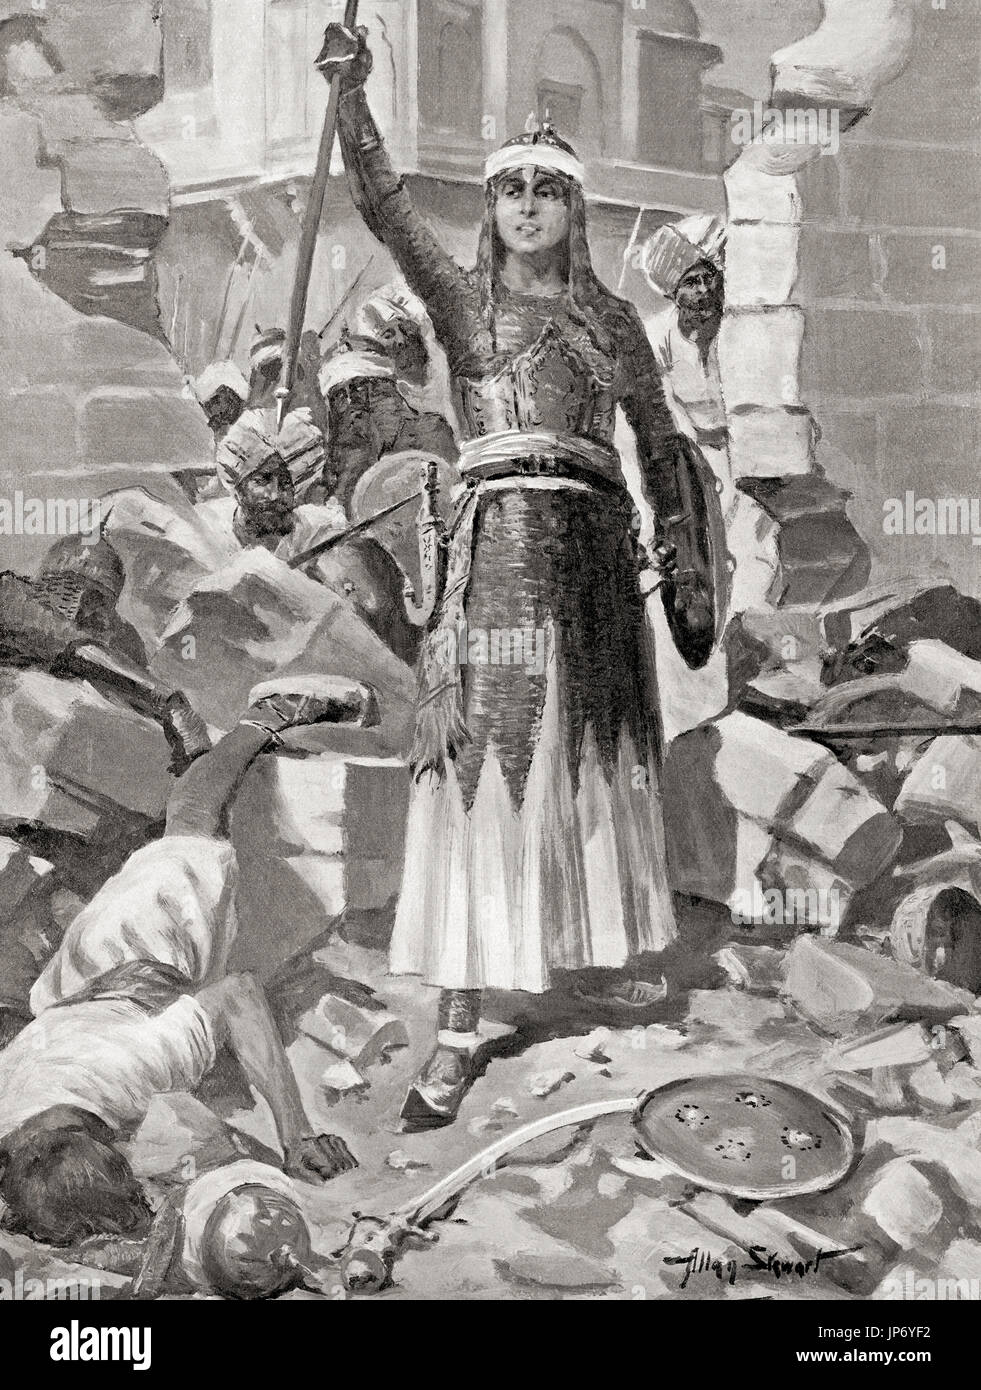 Princess Chand Bibi successfully defends the Ahmadnagar fort against the Mughal forces of Emperor Akbar in  1595.  Chand Bibi,1550–1599.  Indian Muslim regent and warrior.  After the painting by Allan Stewart, (1865-1951).  From Hutchinson's History of the Nations, published 1915. Stock Photo